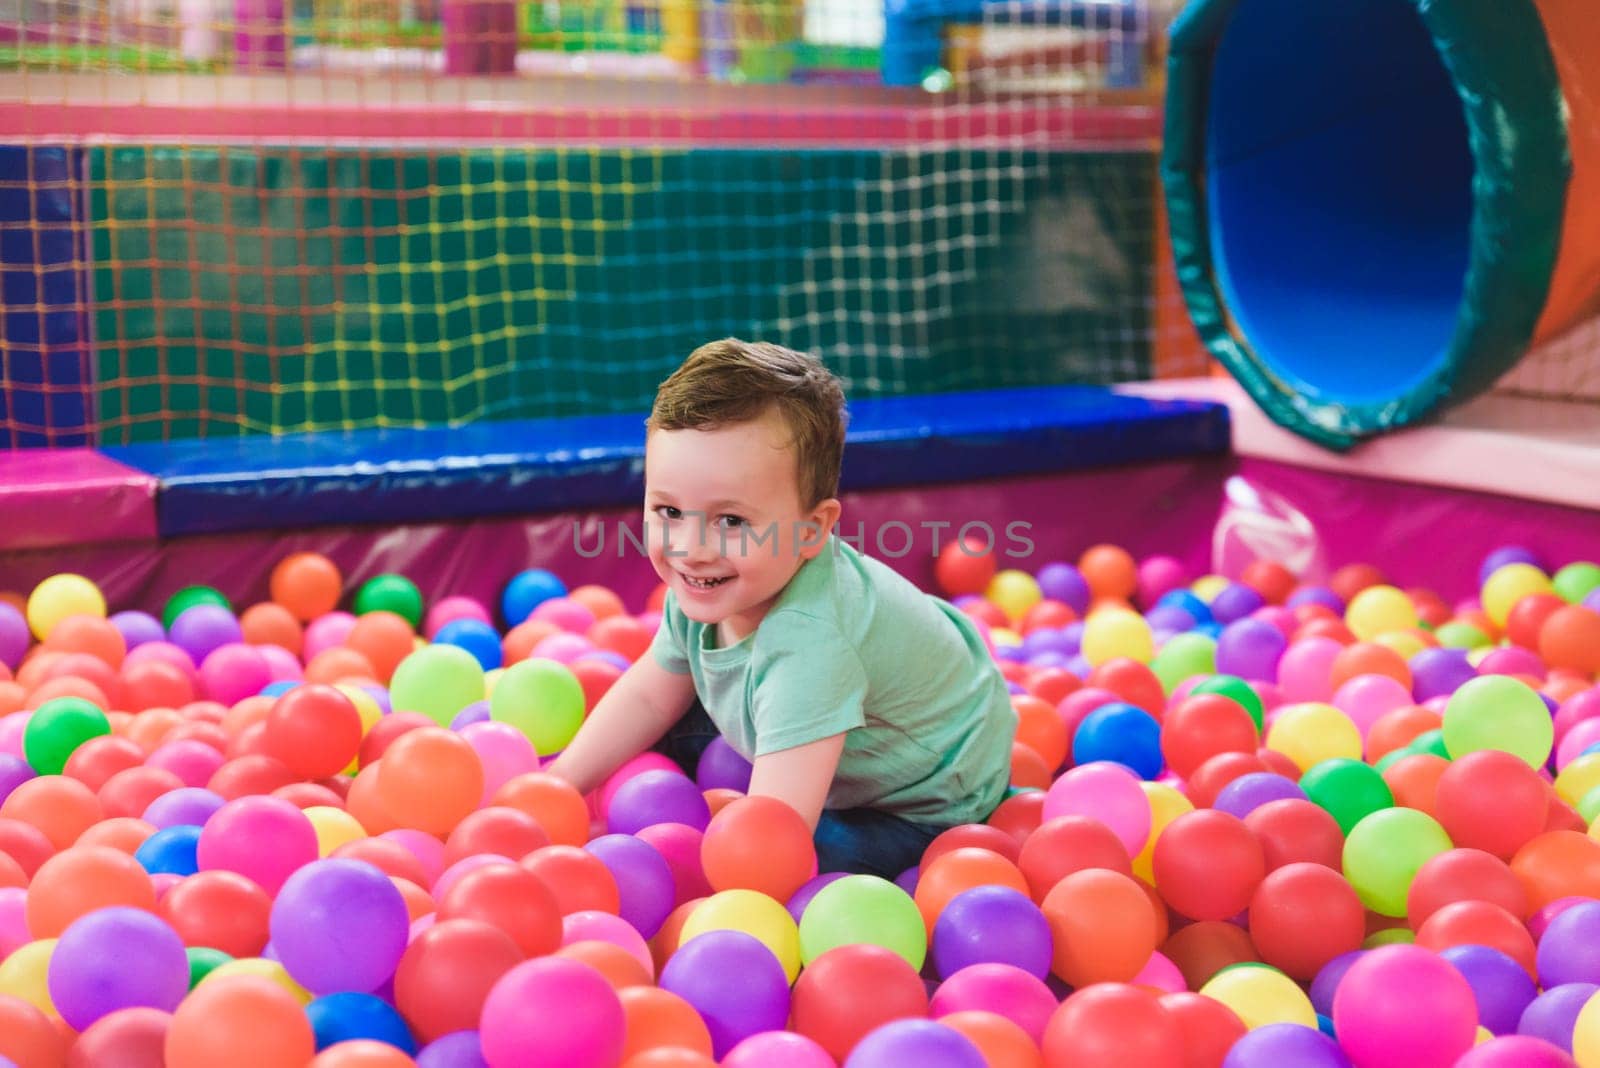 Happy laughing child laughing in an indoor play center. Children playing with colored balls in the playground ball pool. Party by jcdiazhidalgo